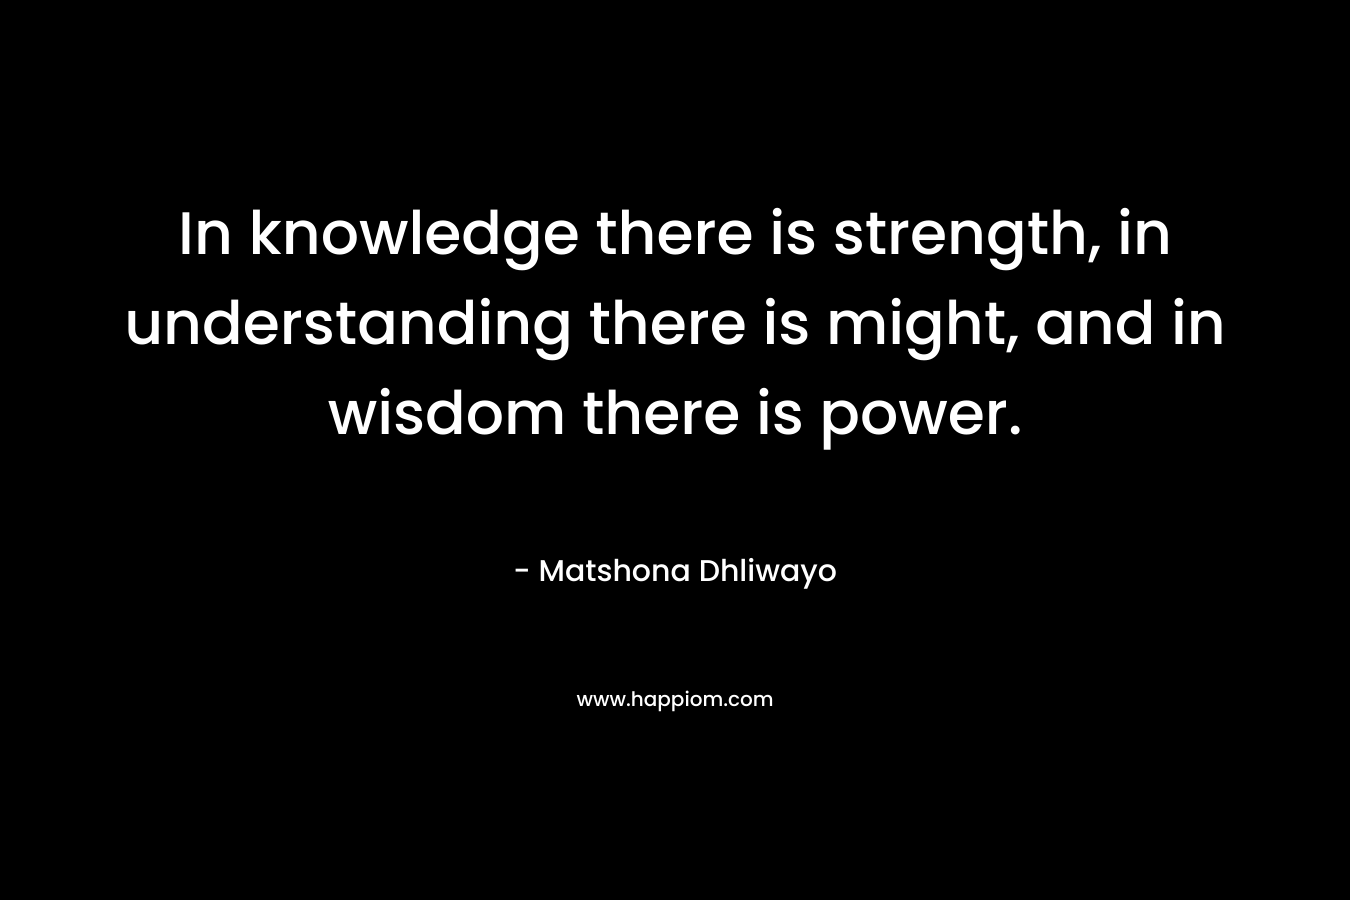 In knowledge there is strength, in understanding there is might, and in wisdom there is power.